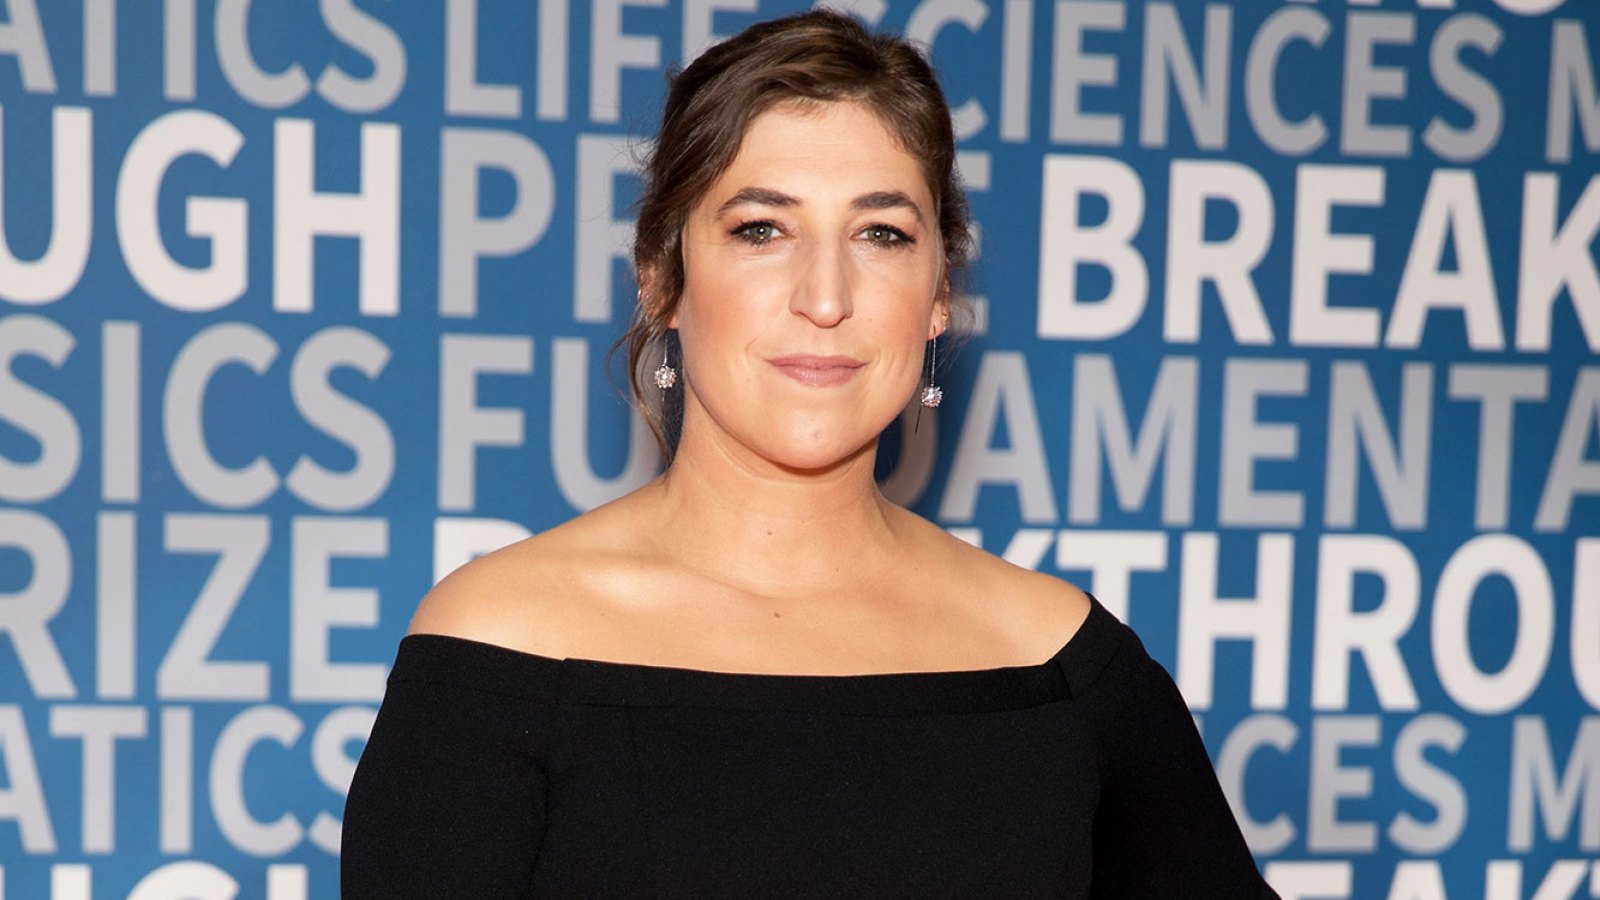 Mayim Bialik Gets Real Post-Split on Christmas Eve: I’m ‘Not Doing So Well’